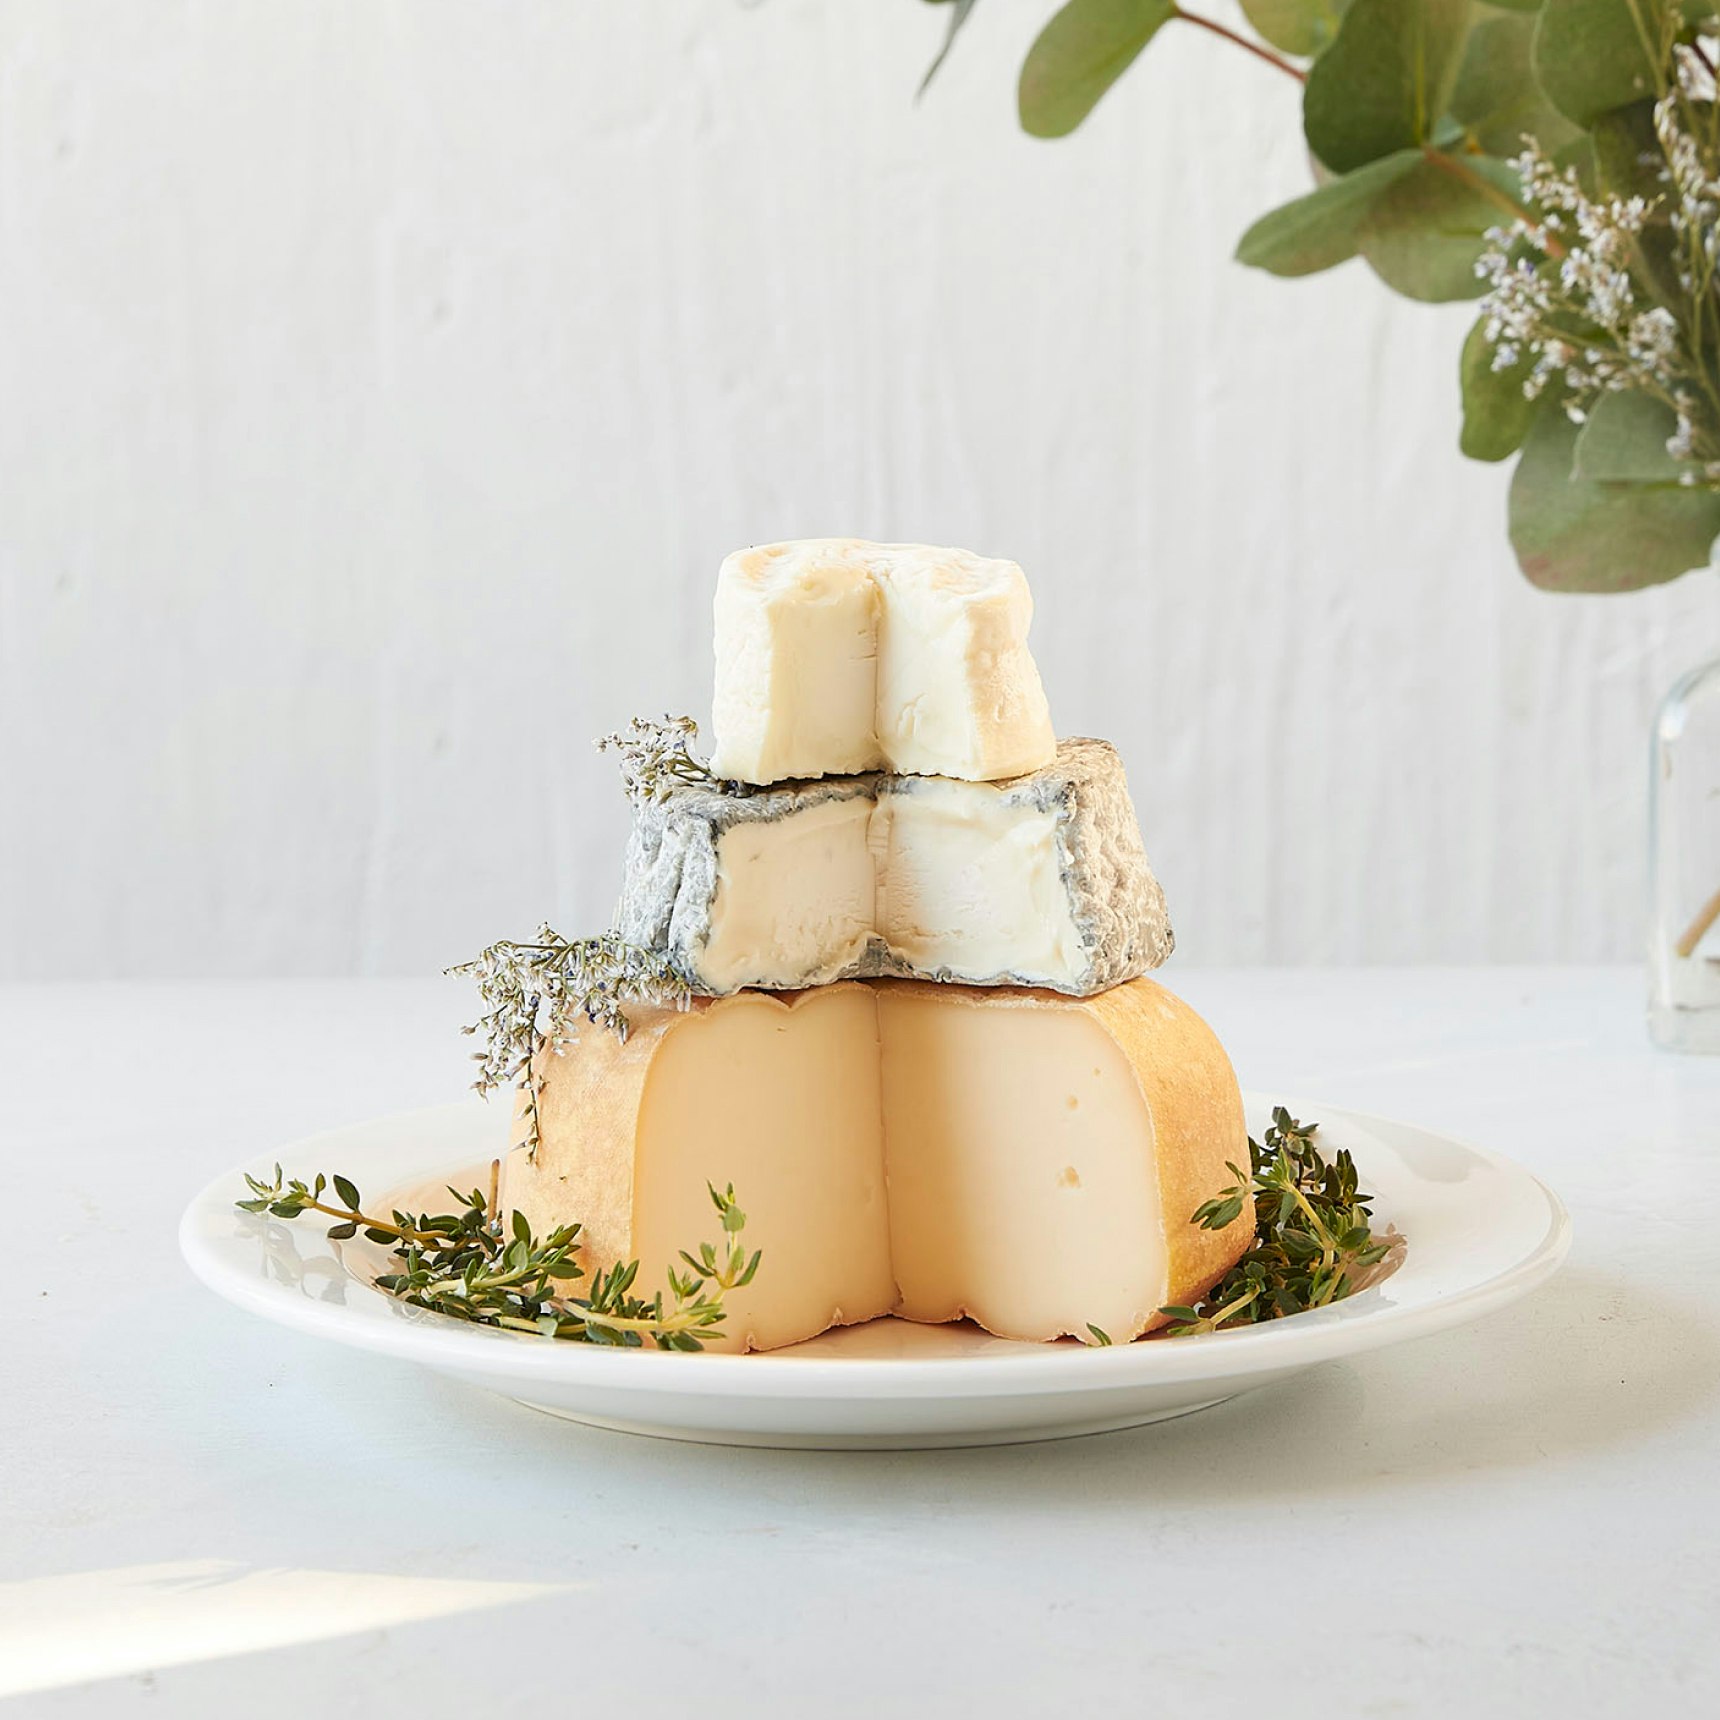 Cheese tower for two